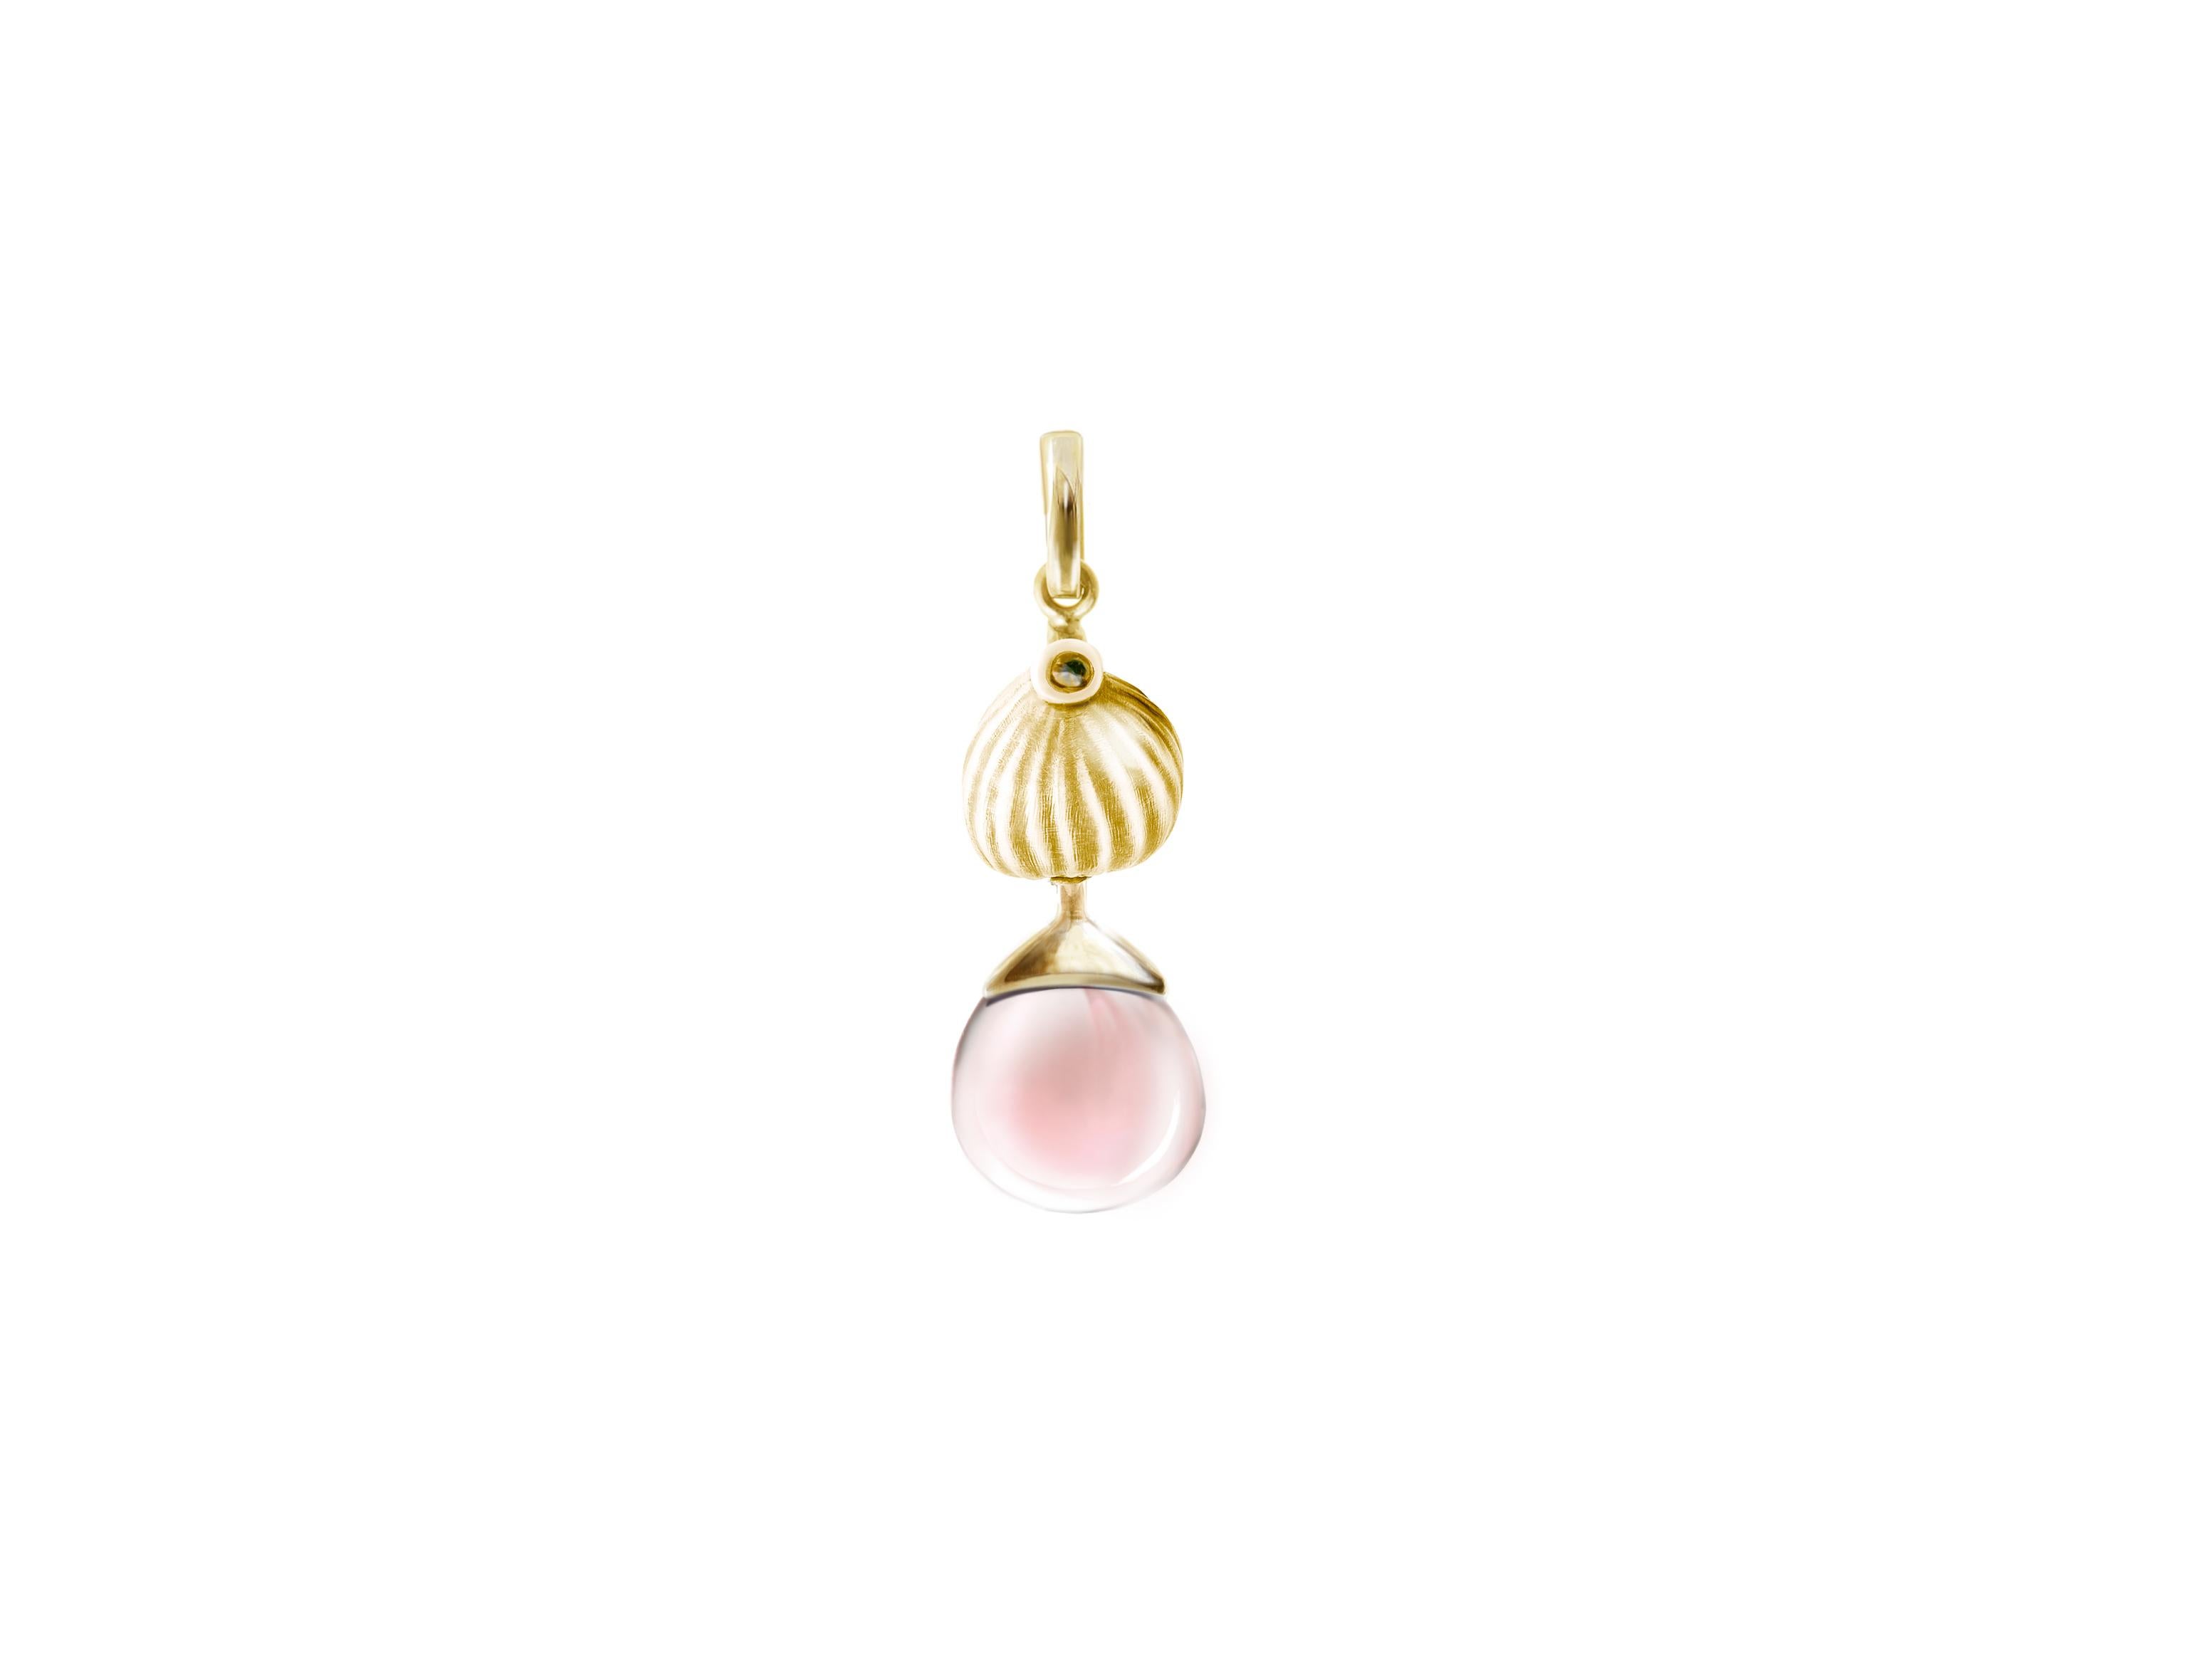 Yellow Gold Drop Pendant Necklace with Rose Quartz by the Artist In New Condition For Sale In Berlin, DE